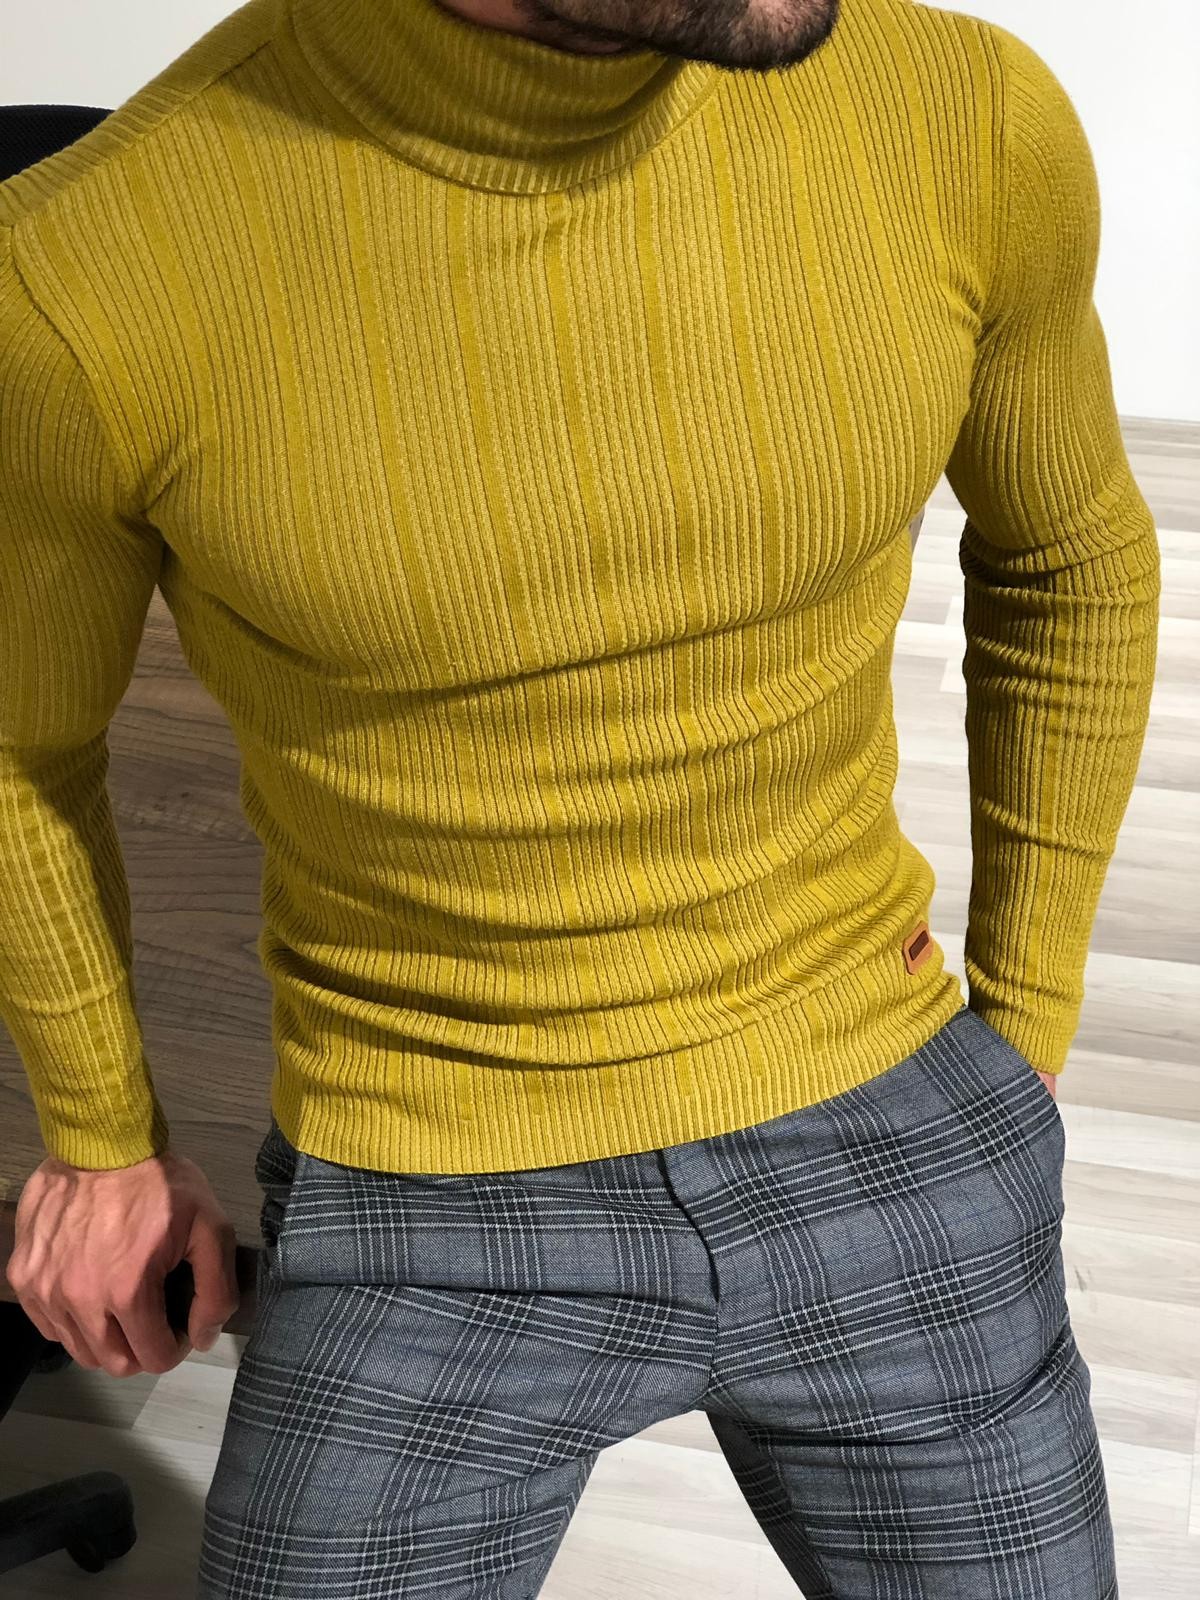 Yellow Slim Fit Turtleneck Sweater by Gentwith.com with Free Shipping